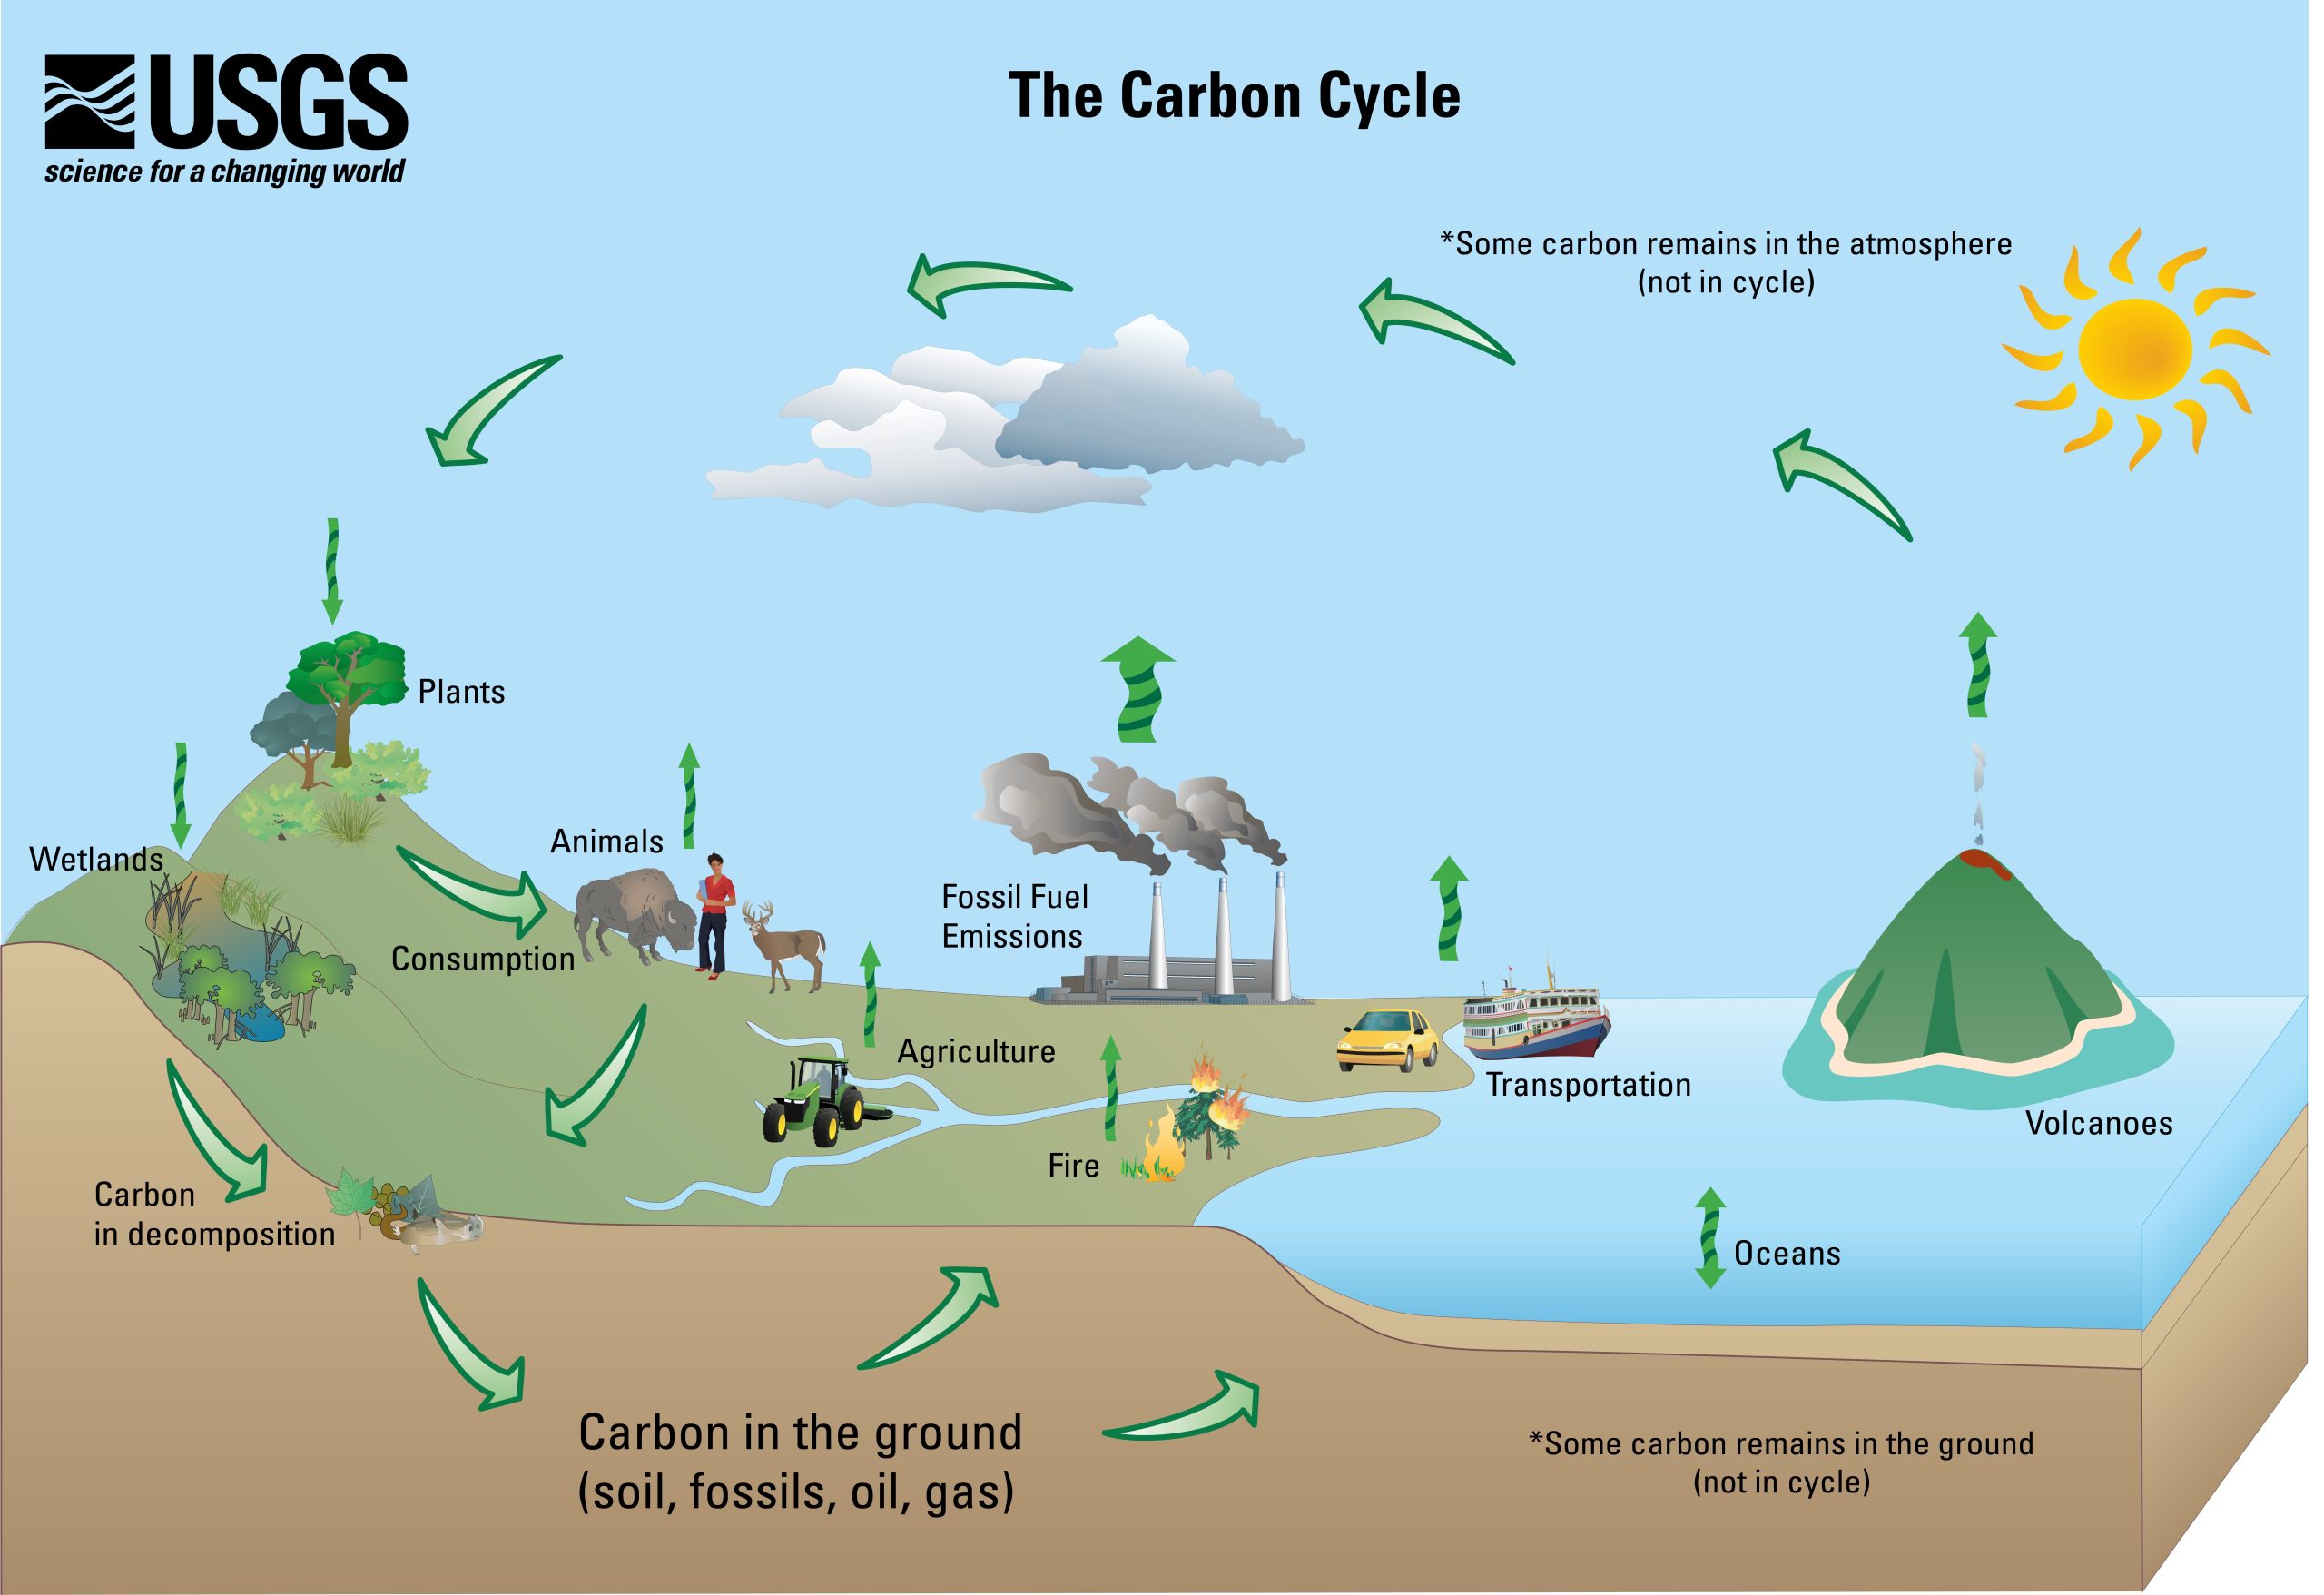 A diagram depicting the continuous movement and transformation of carbon on Earth. The diagram shows a circular process with labeled arrows and key components: starting with the emission of carbon into the atmosphere, arrows indicates carbon released from volcanoes, fossil fuel emissions from factories, agriculture, fire, transportation, oceans, and animals; arrows show carbon returning to Earth's surface through plants, oceans, and wetlands; an arrow shows consumption of carbon by animals; and arrows show carbon entering the ground in decomposition. There is an asterisked note in the sky that reads Some carbon remains in the atmosphere (not in cycle) and there is another asterisked note in the ground that says "Some carbon remains in the ground (not in cycle).